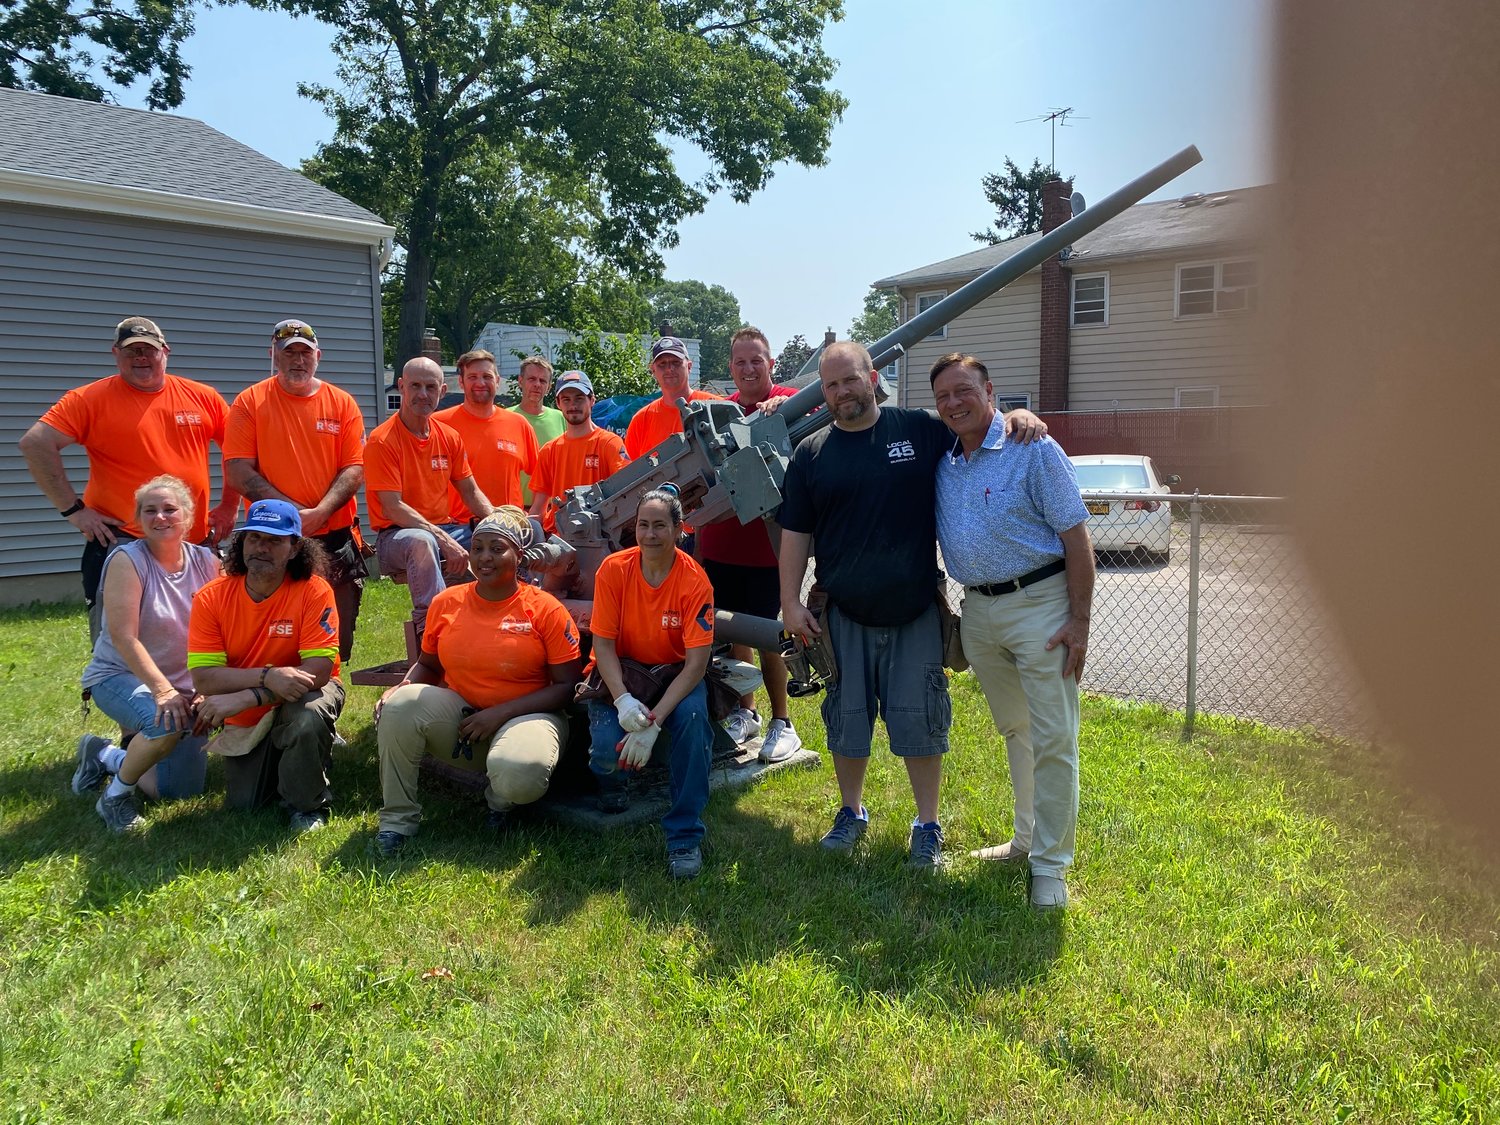 Over a dozen union carpenters volunteered on a steamy July Saturday to help rebuild a VFW Hall.